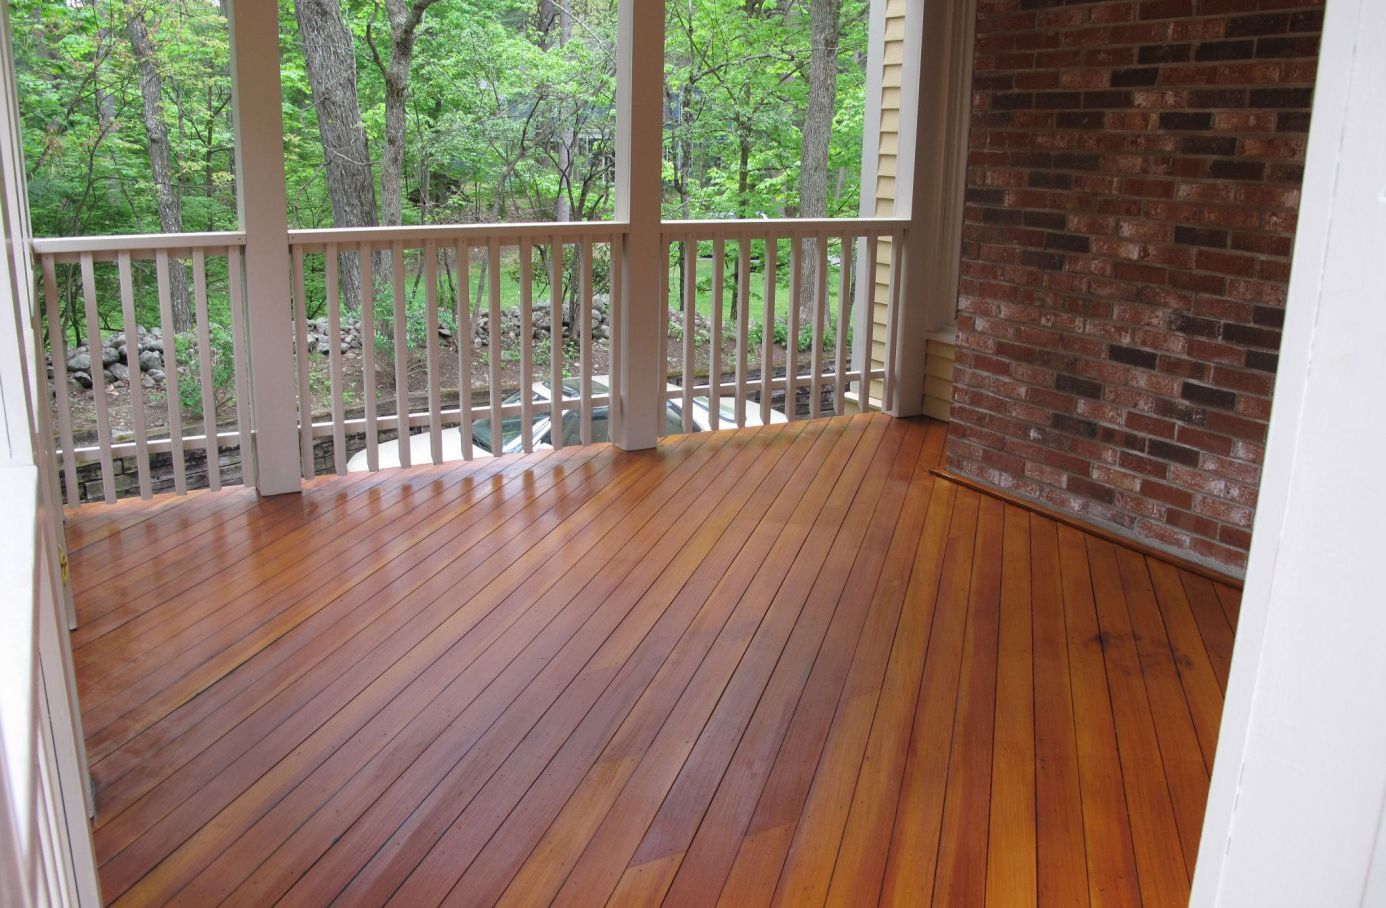 Douglas Fir Decking With Teak Stain Sealer And Opaque Navajo White throughout proportions 1386 X 908